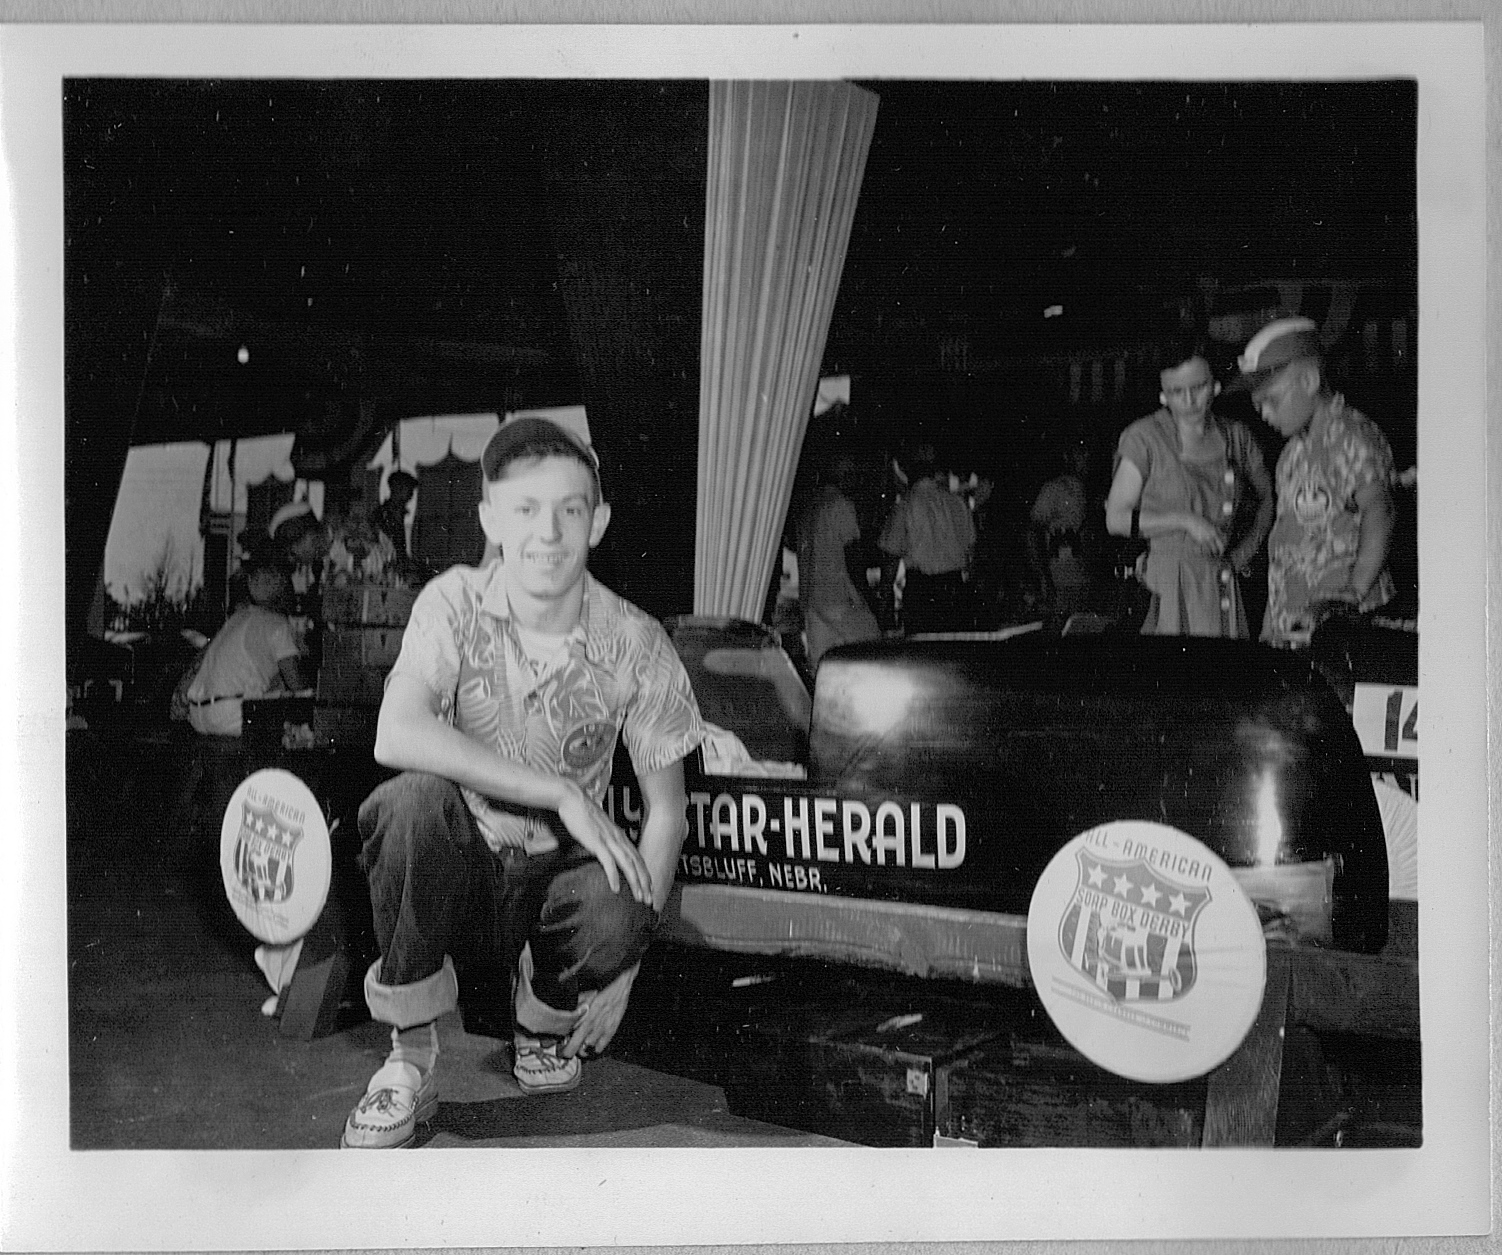 Dick Otte with his car in Akron for the All American Soap Box Derby, August 1951. His Akron sponsor was the Scottsbluff Daily Star-Herald.